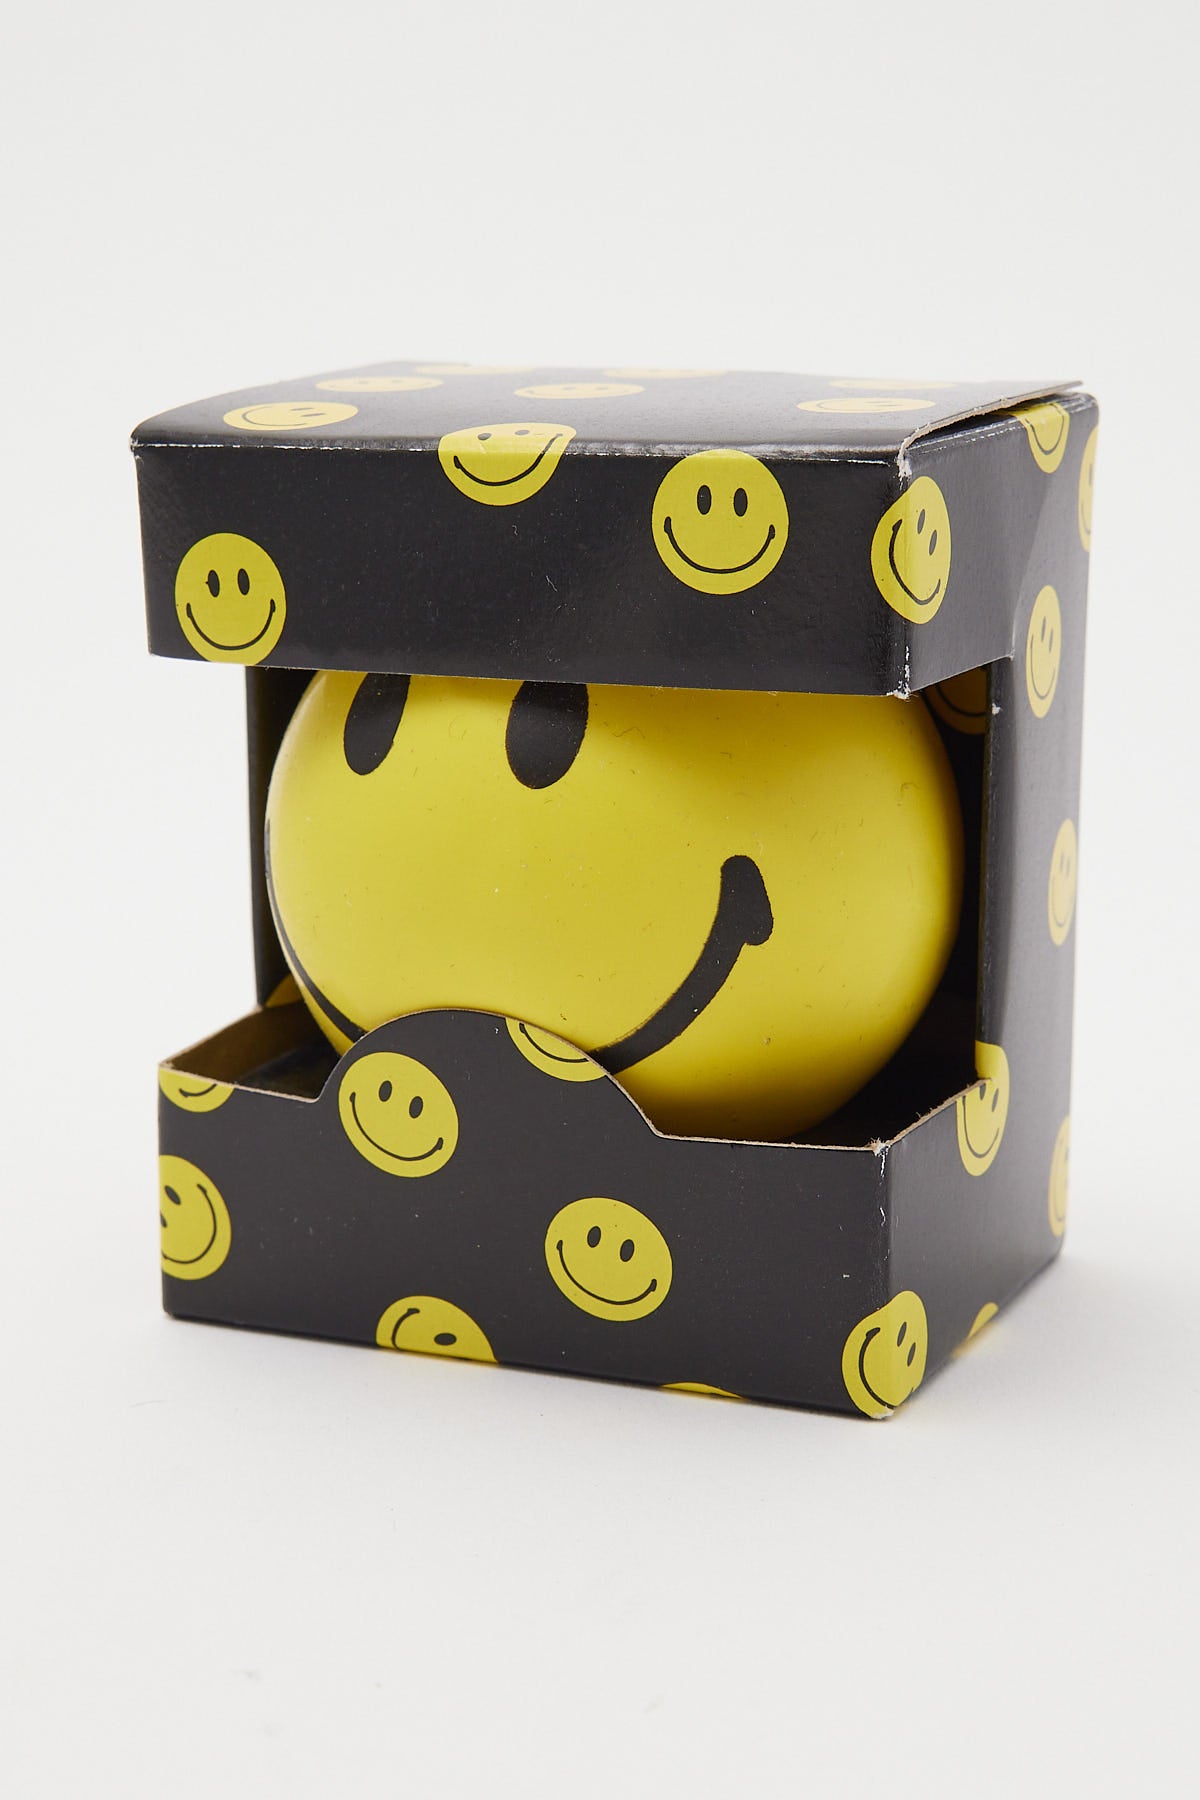 Mdi Smiley Stress-relief Ball Yellow